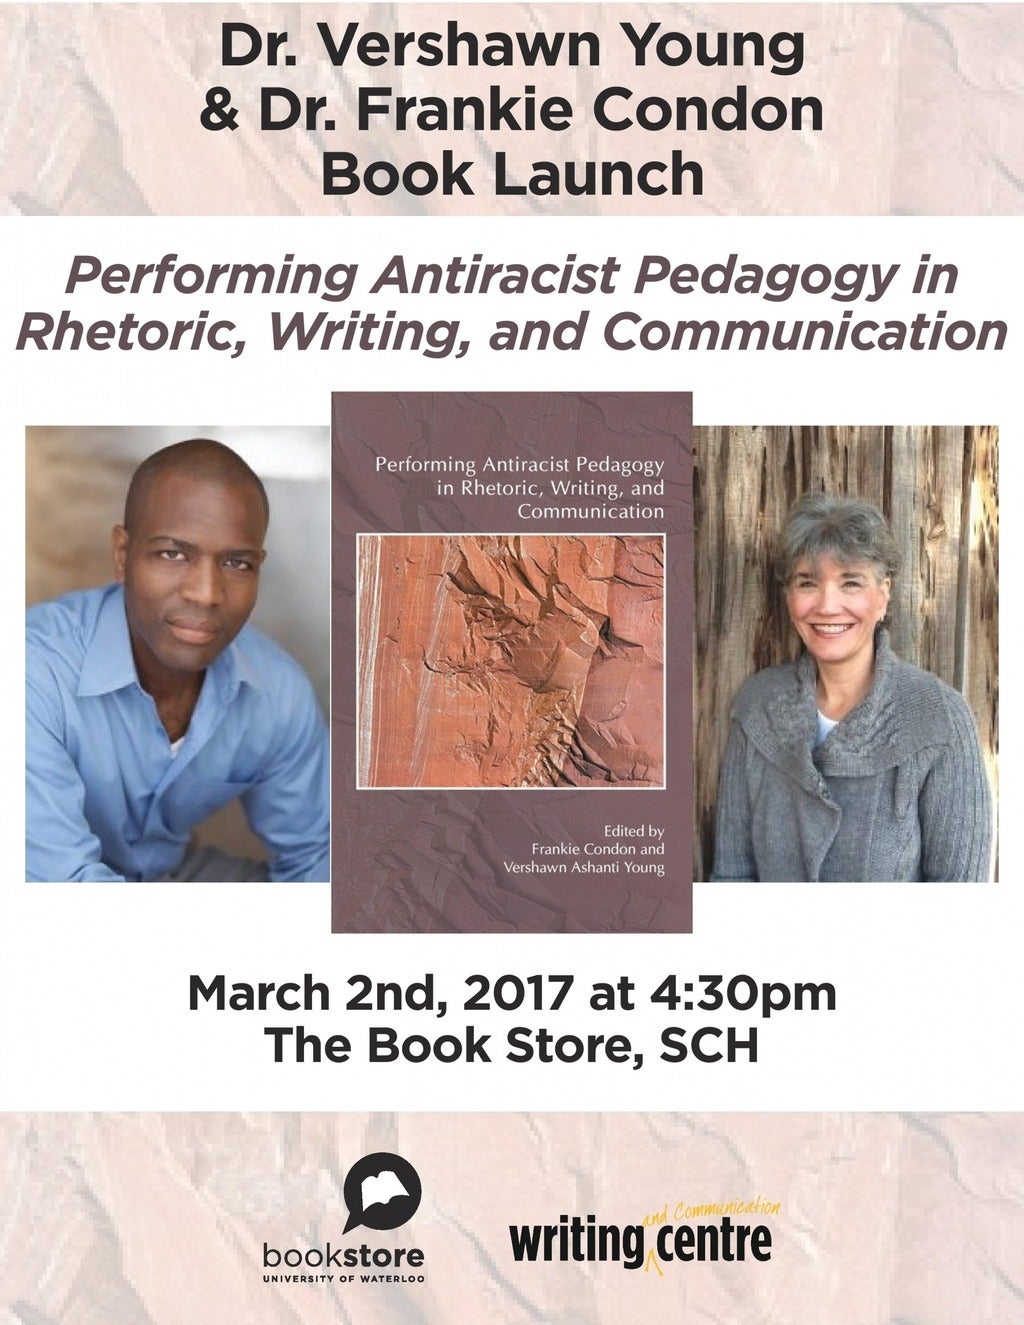 Book launch poster featuring  Dr. Frankie Condon and Dr. Vershawn Young